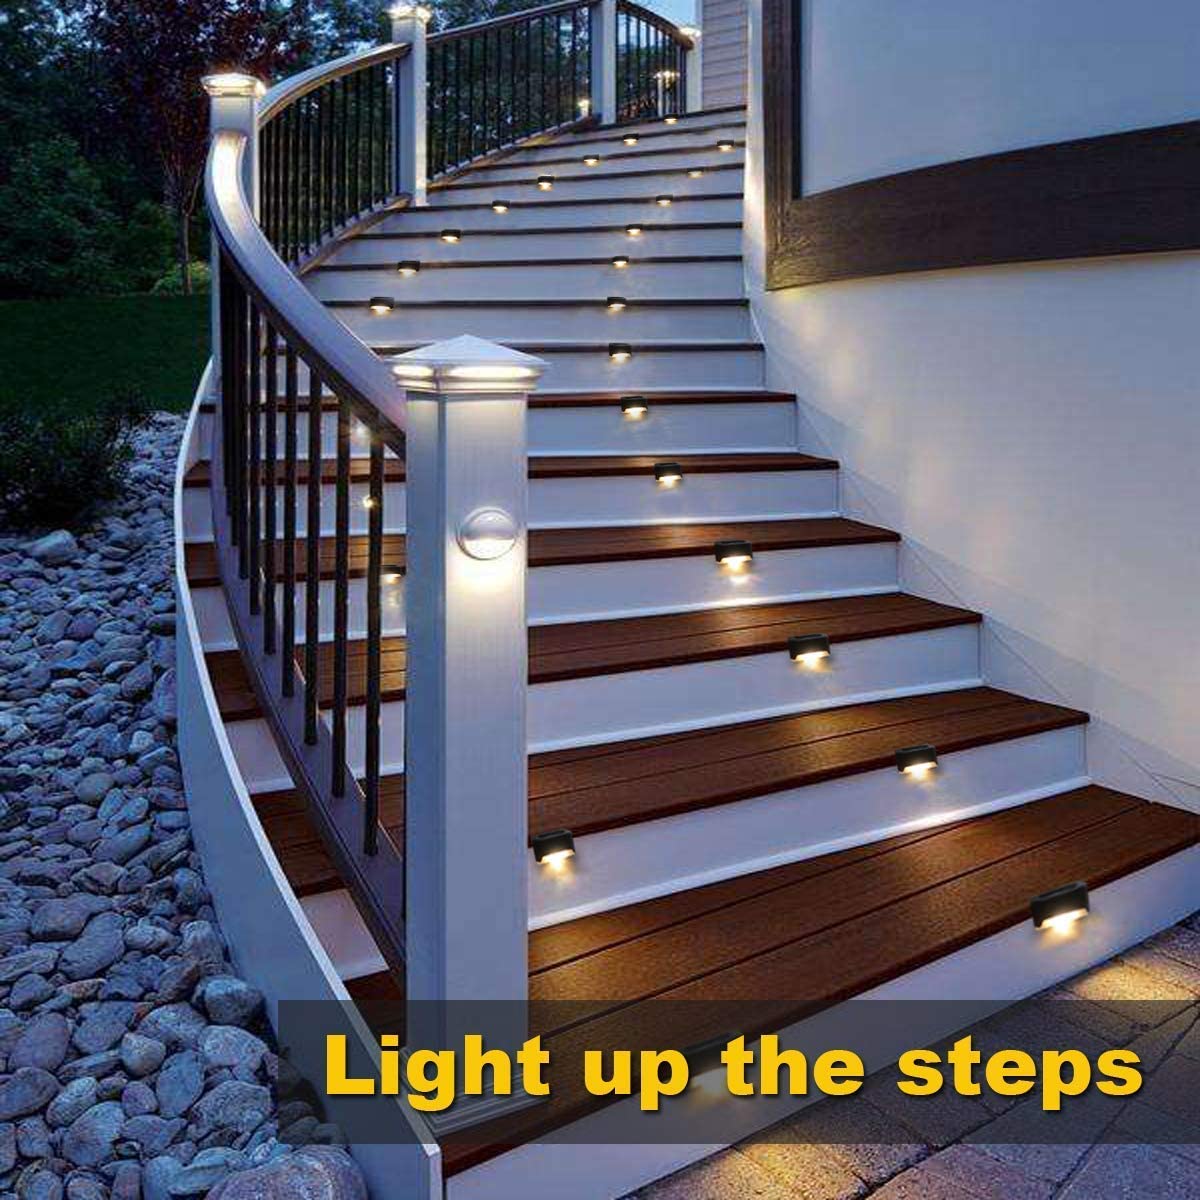 NEW STUNNING DIMPLE EFFECT BLACK PLACING,FENCES,WALL DRIVE WAY SOALR 4PK LIGHTS 